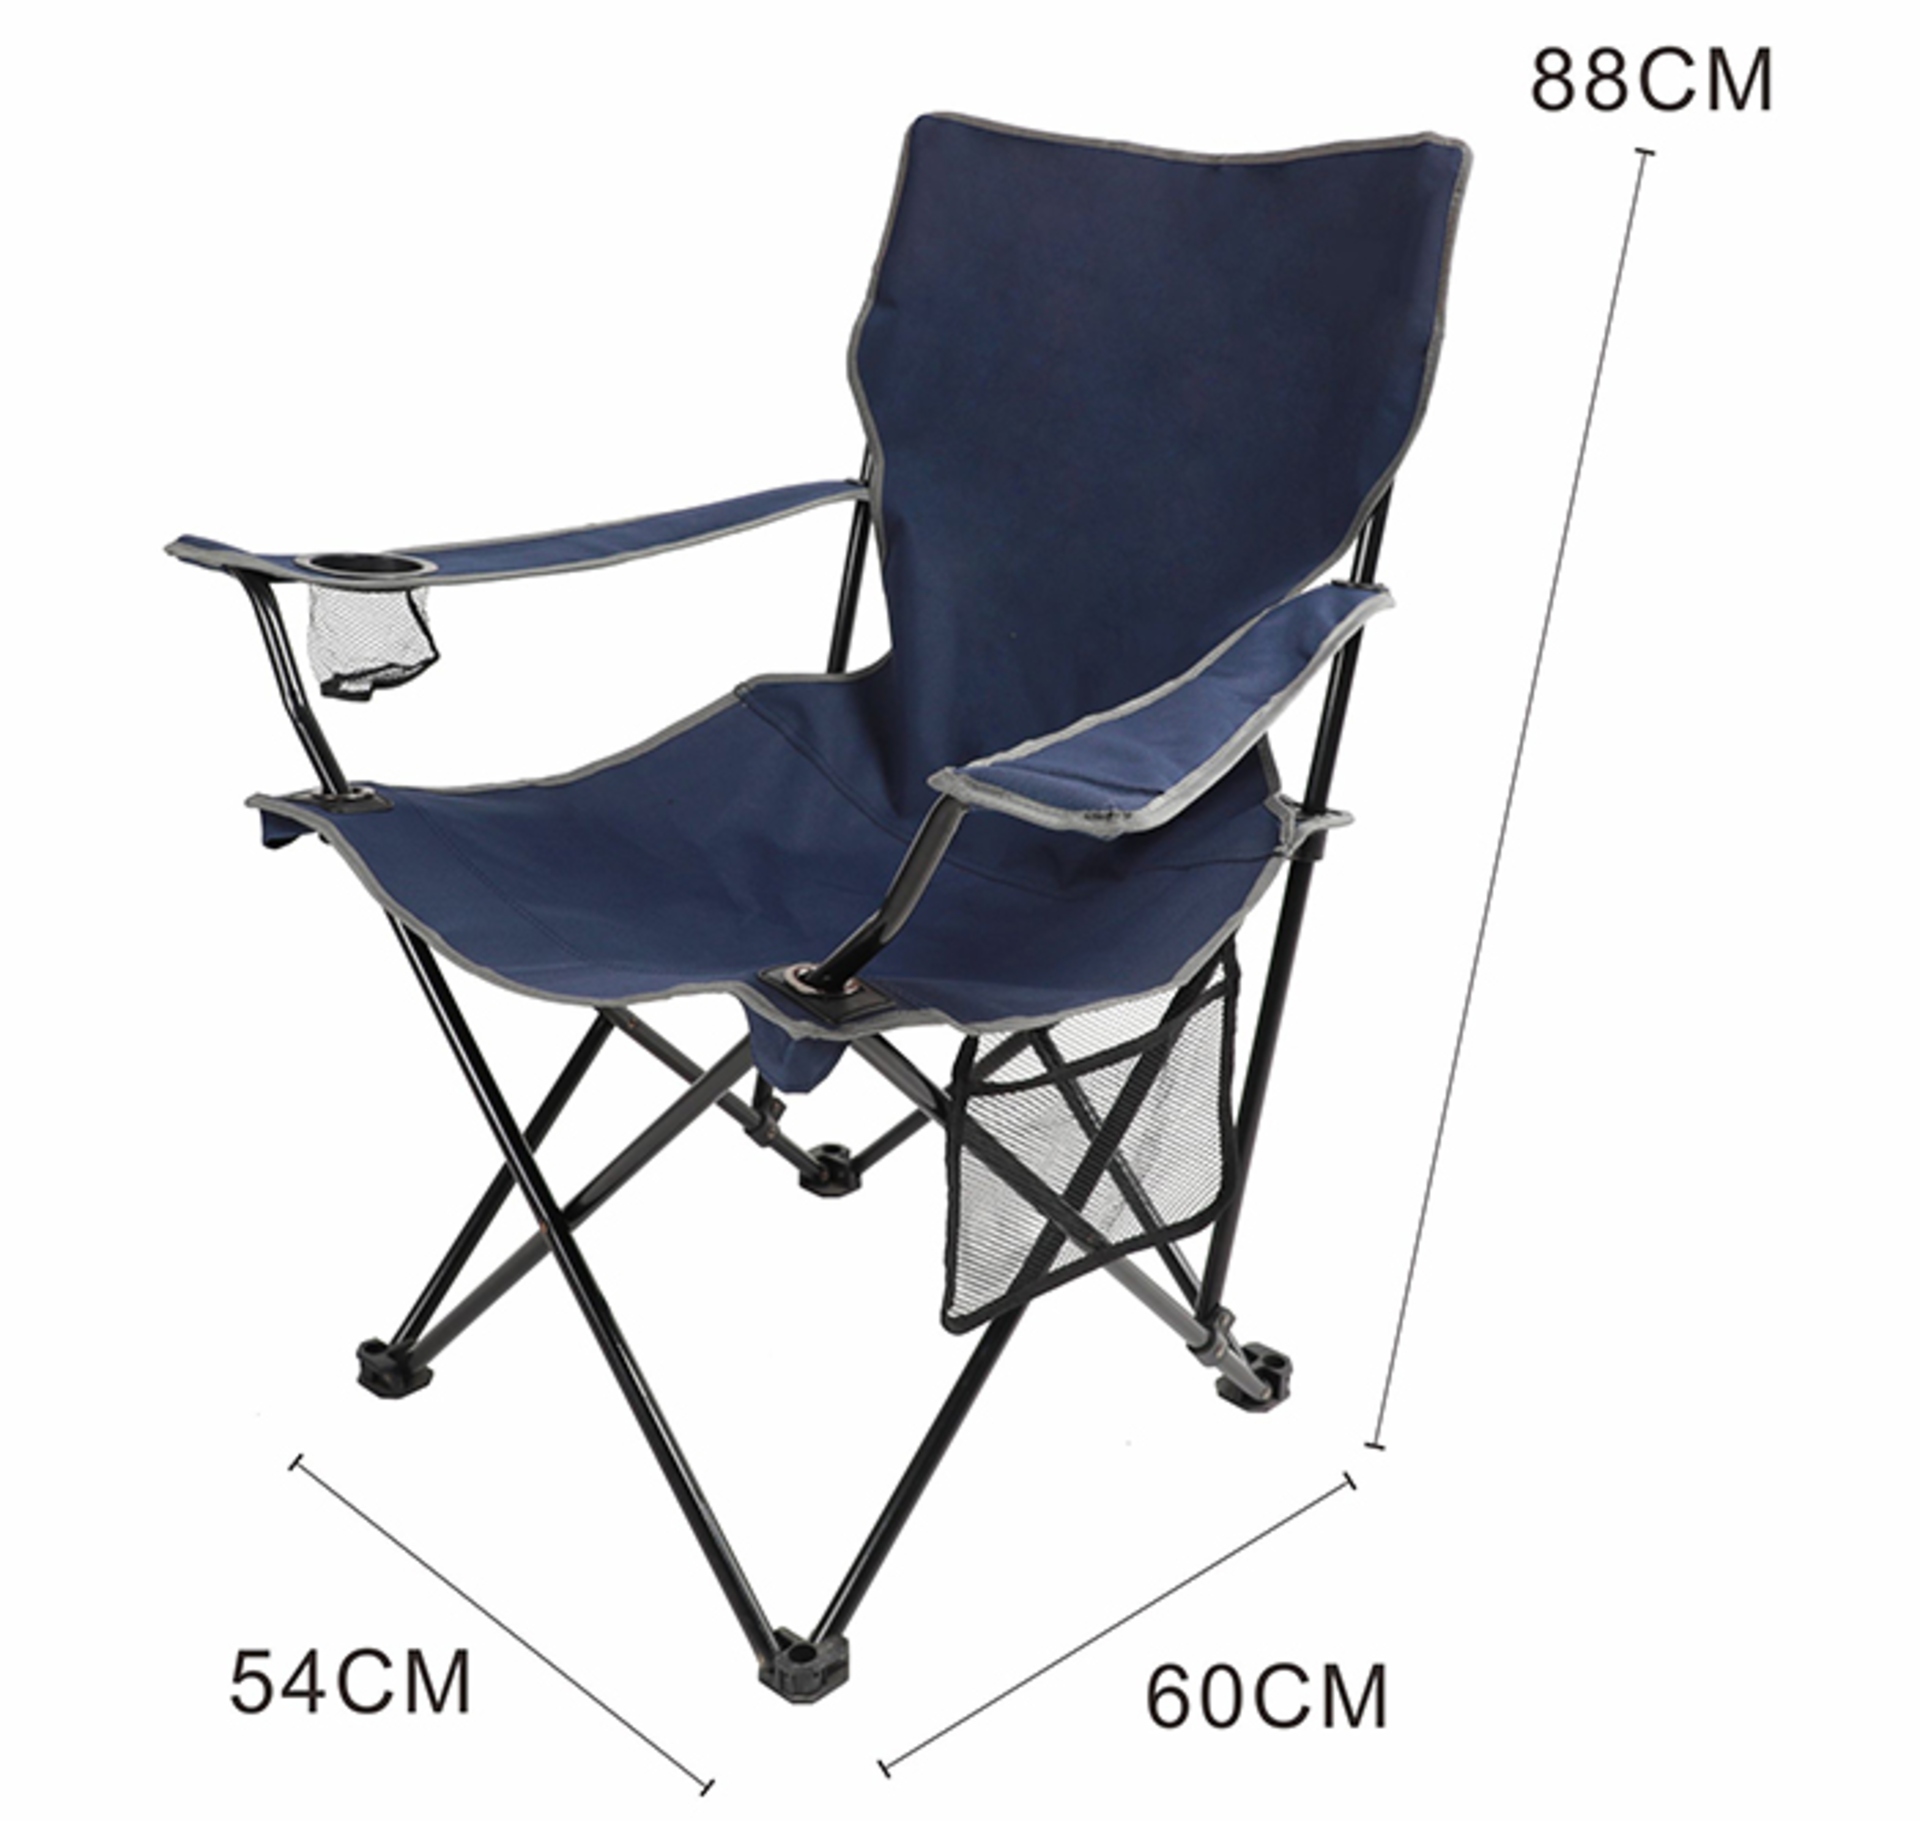 UNITS - RBSM CAMPING FOLDING CHAIRS W/ CARRYING BAGS - NAVY BLUE (NEW) (MSRP $75) - Bild 4 aus 4